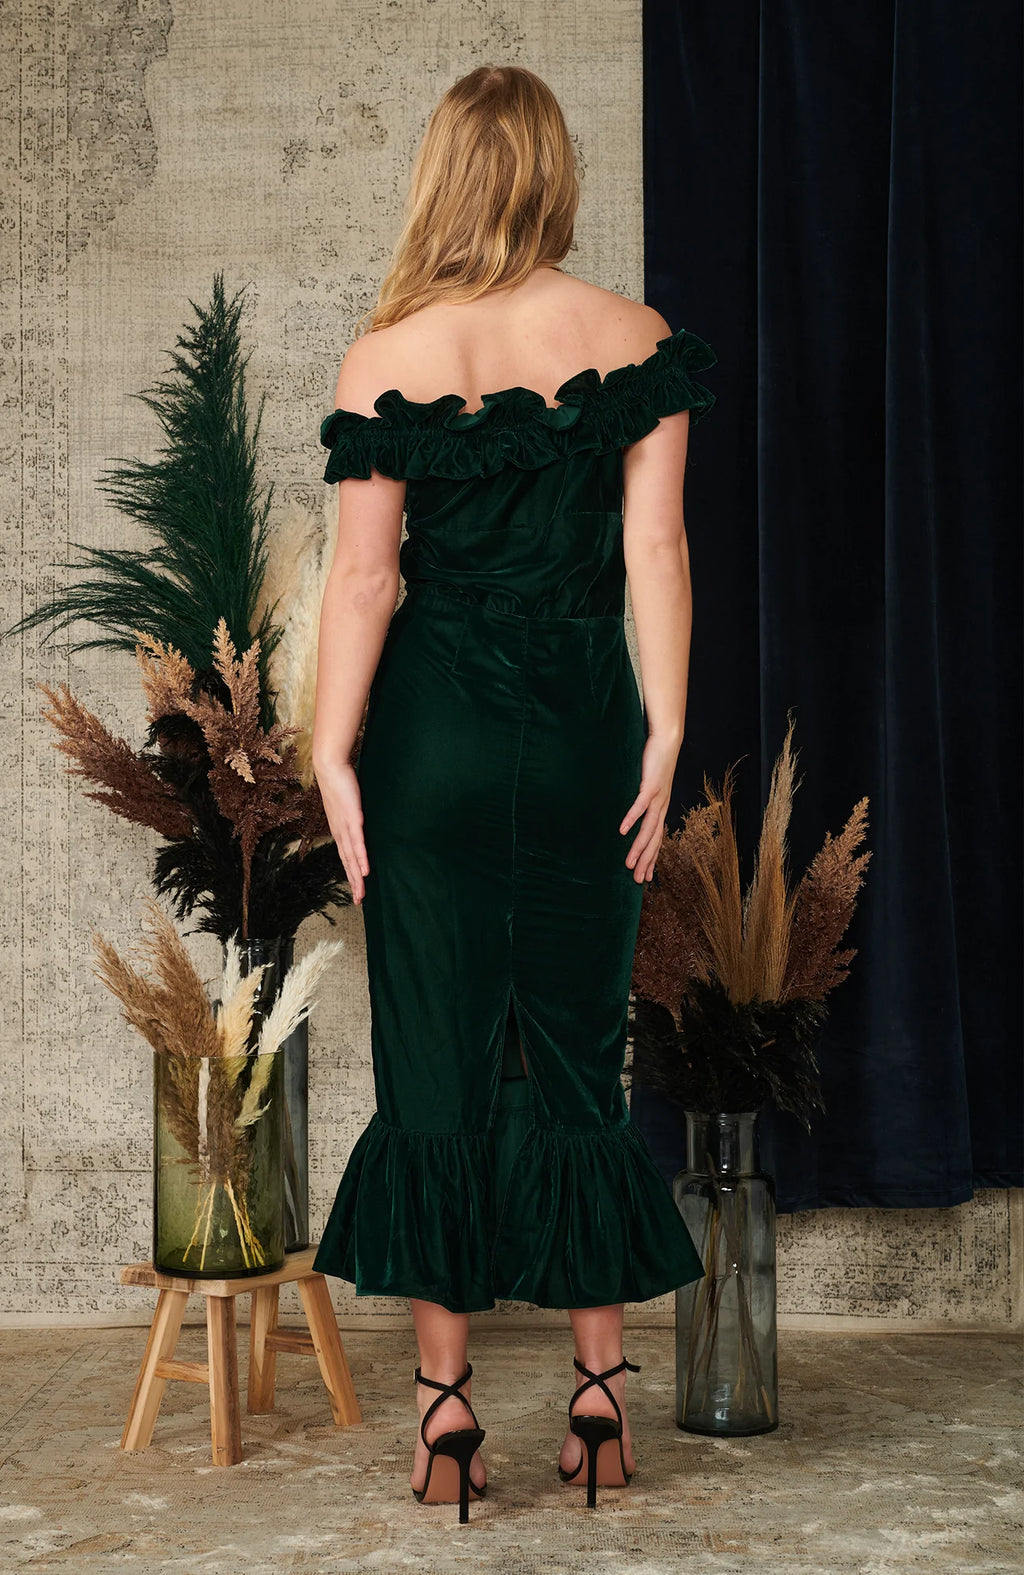 The bardot neckline is trimmed with an exaggerated ruffle for standout impact, and the figure skimming pencil skirt cuts a flattering silhouette. The rich dark green velvet both looks and feels lovely, and is perfect for any party or event this season.